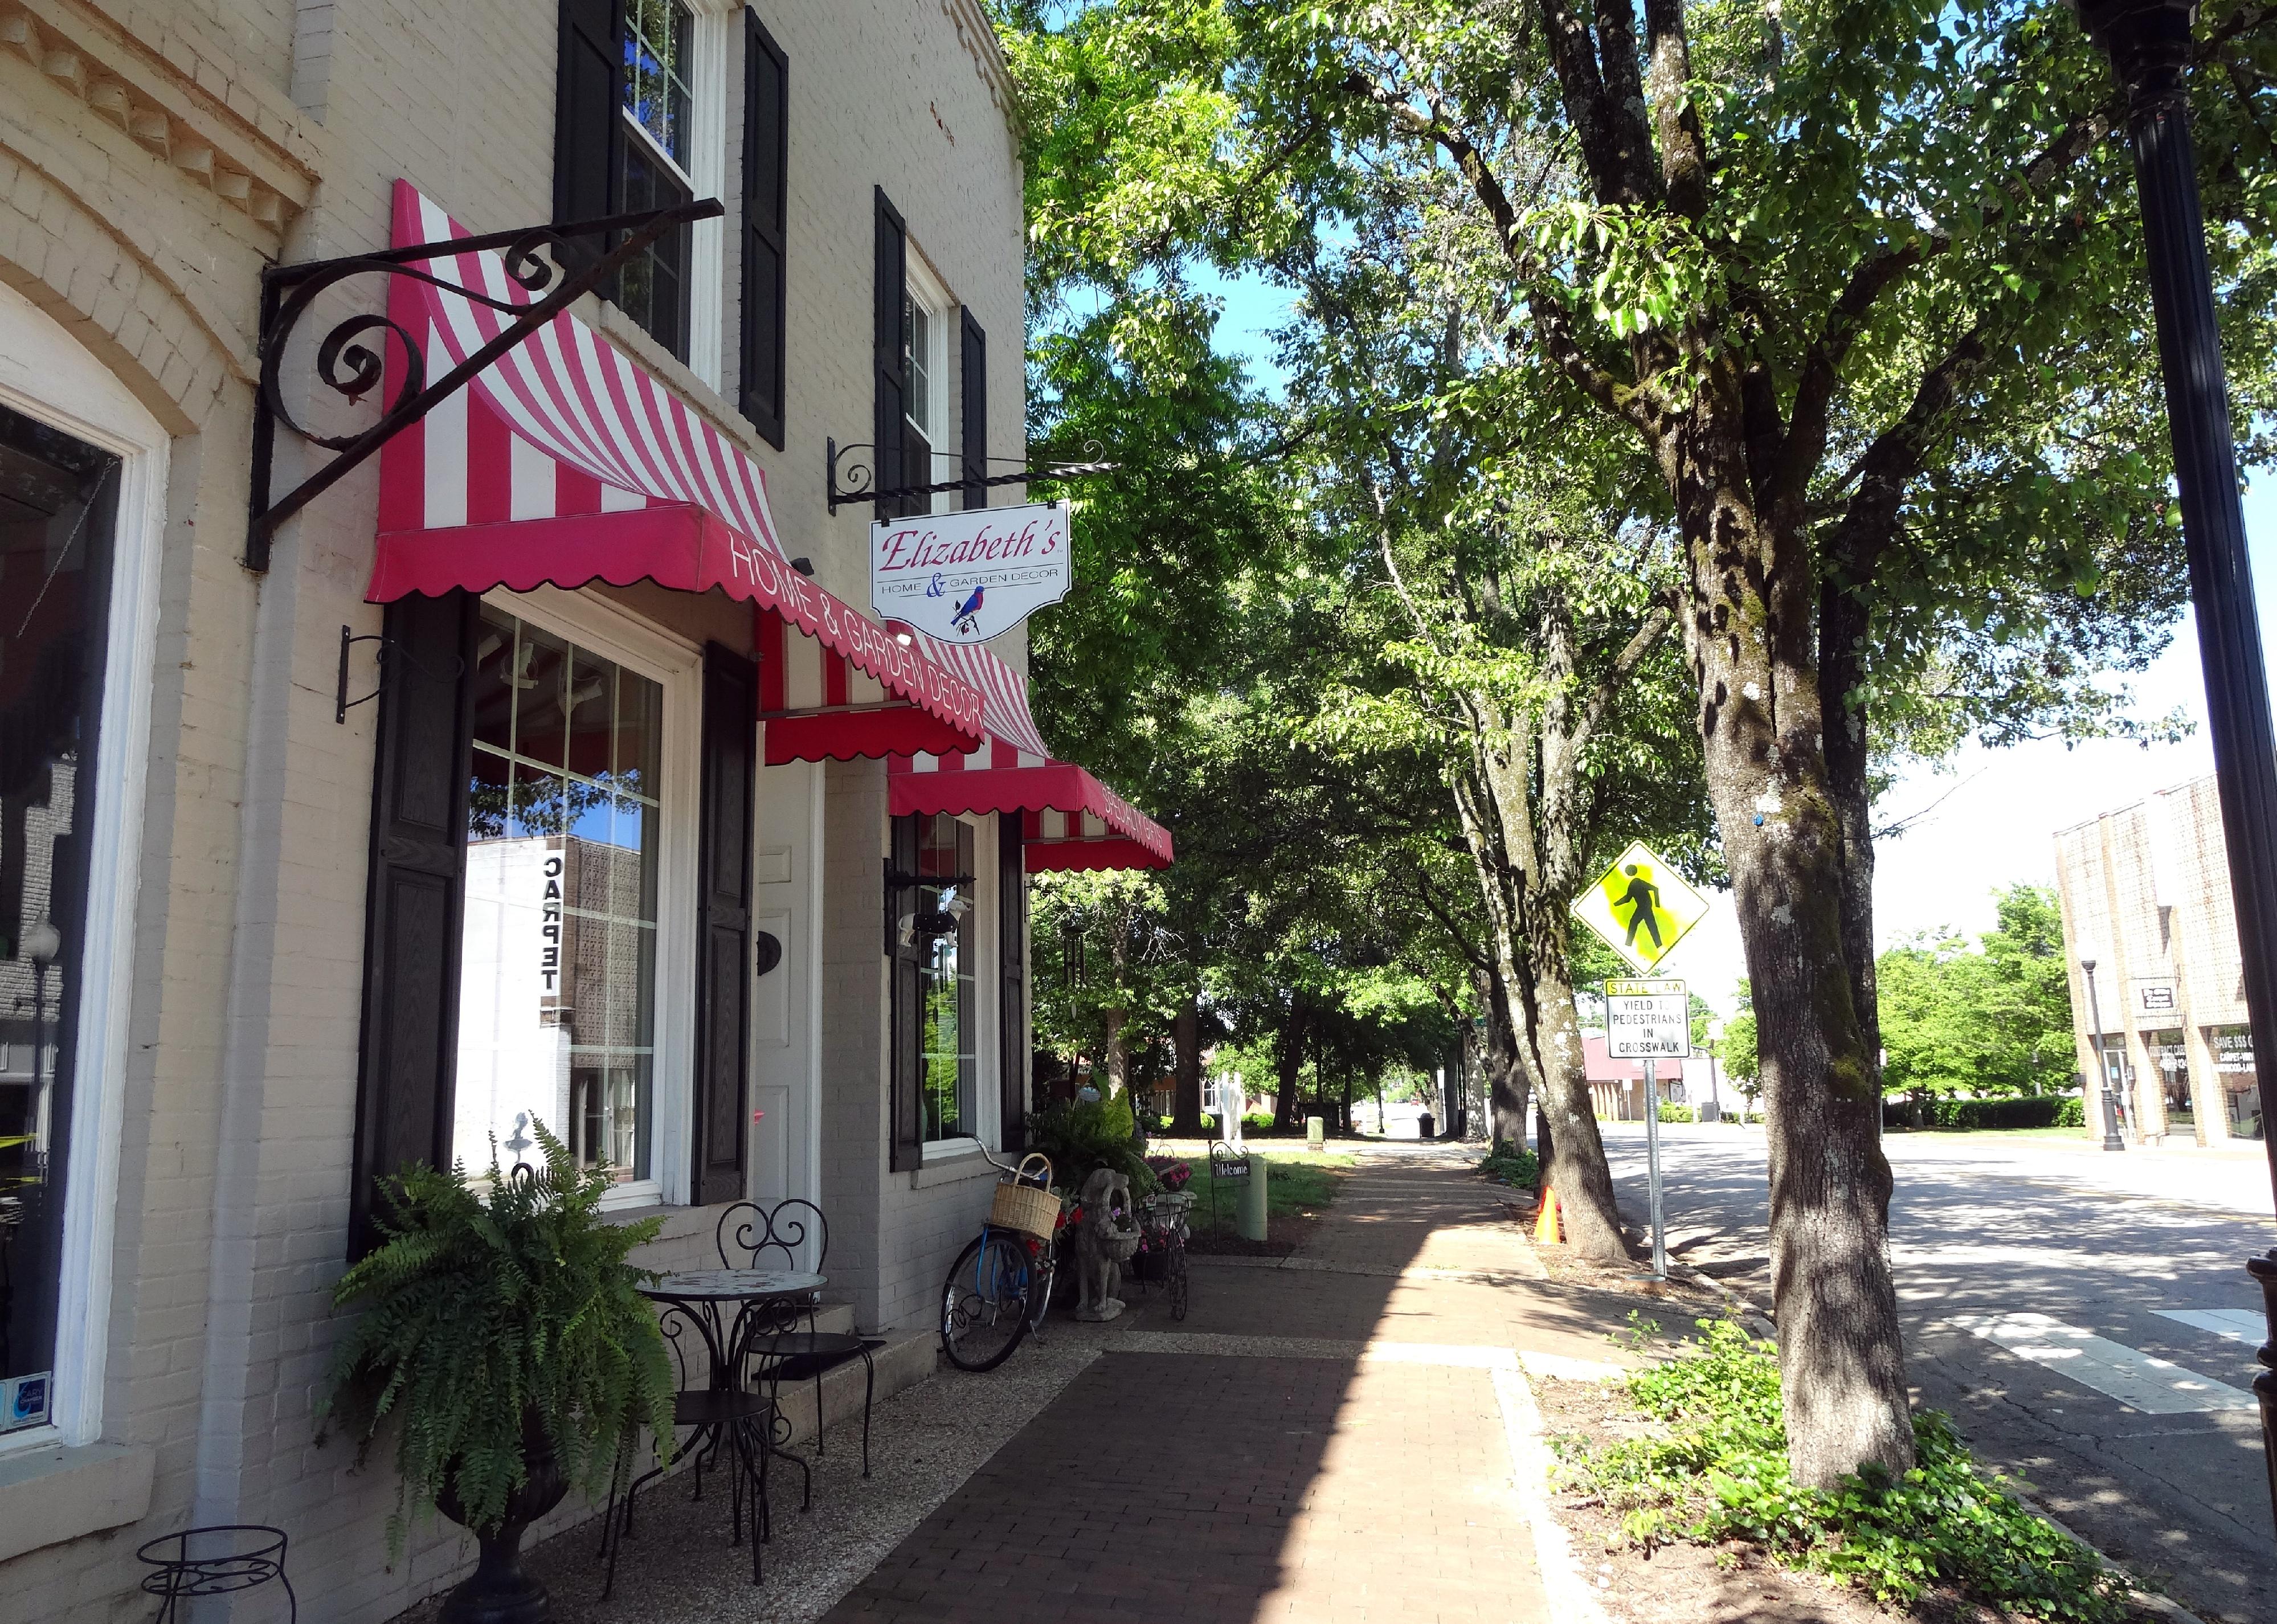 Shops line the sidewalks of downtown Cary.